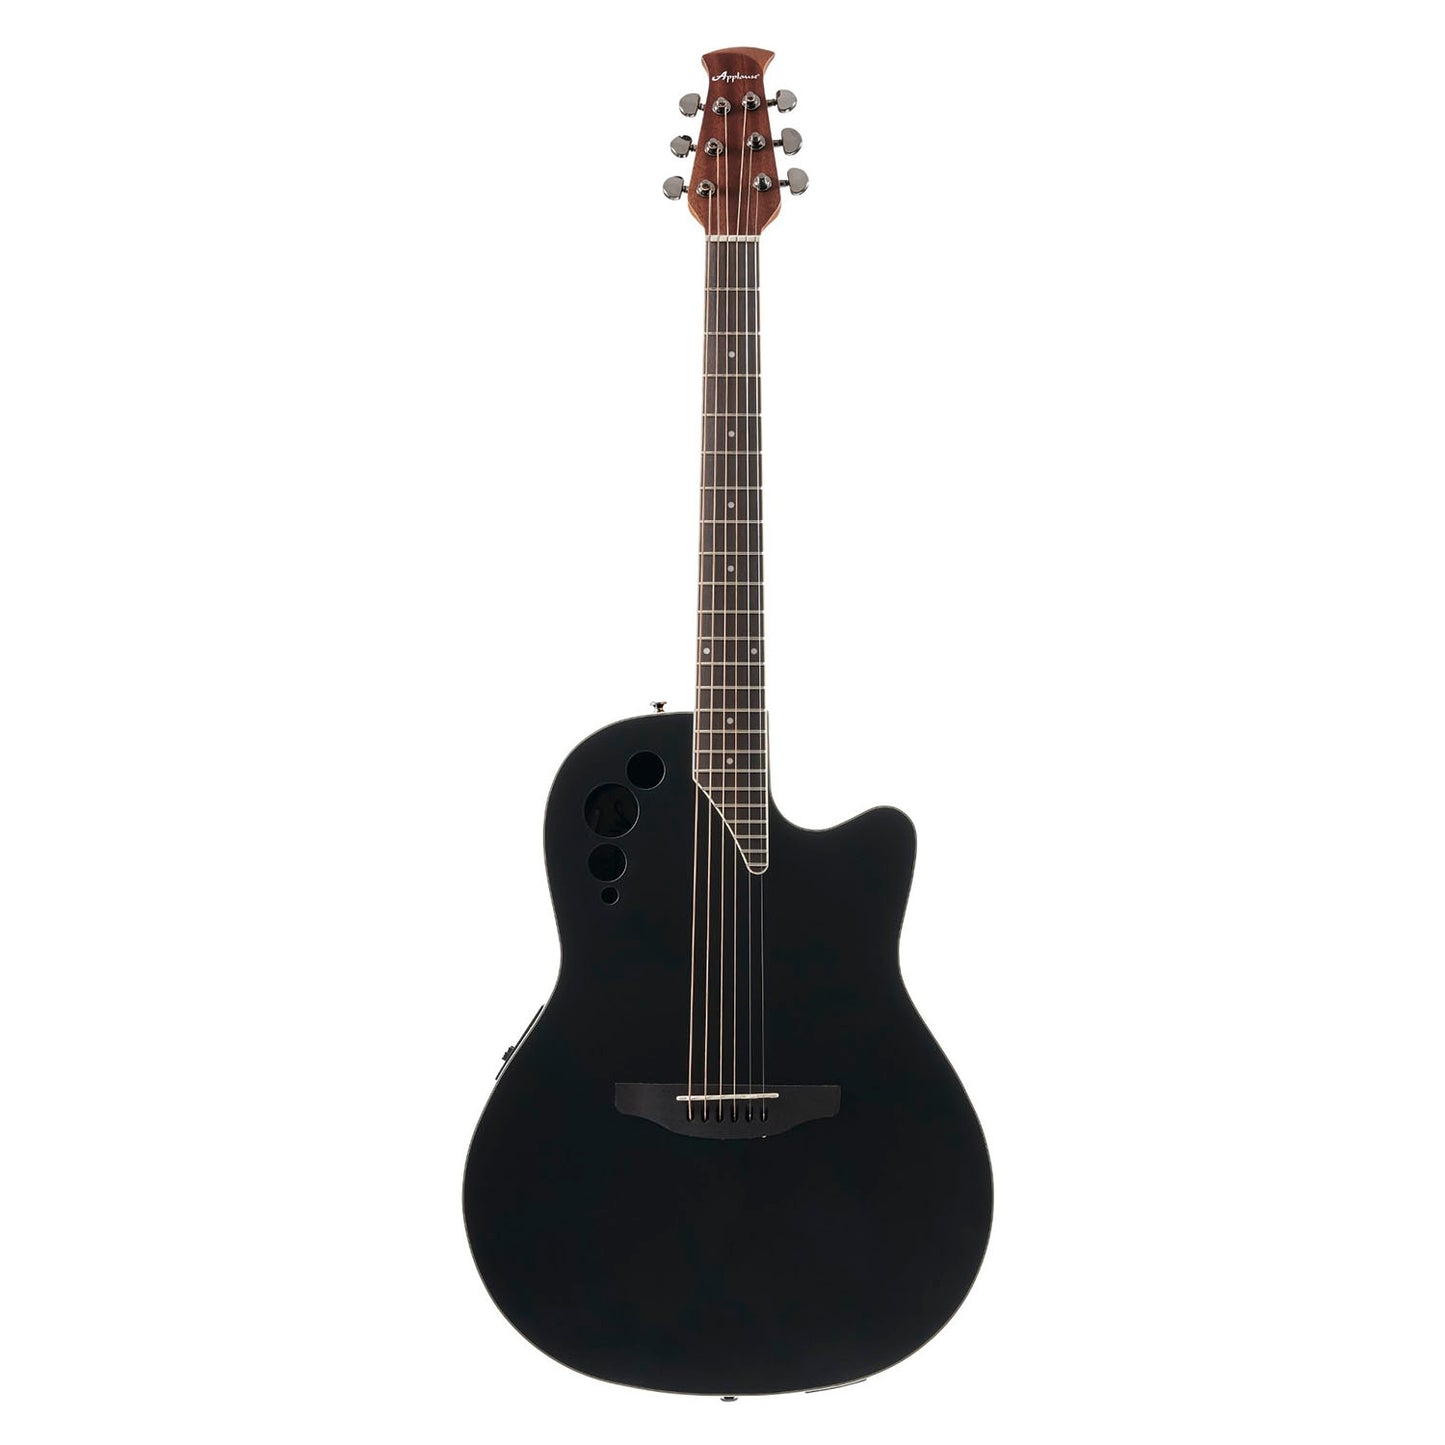 Ovation AE44-5S Applause Mid Depth Acoustic Guitar in Black Satin